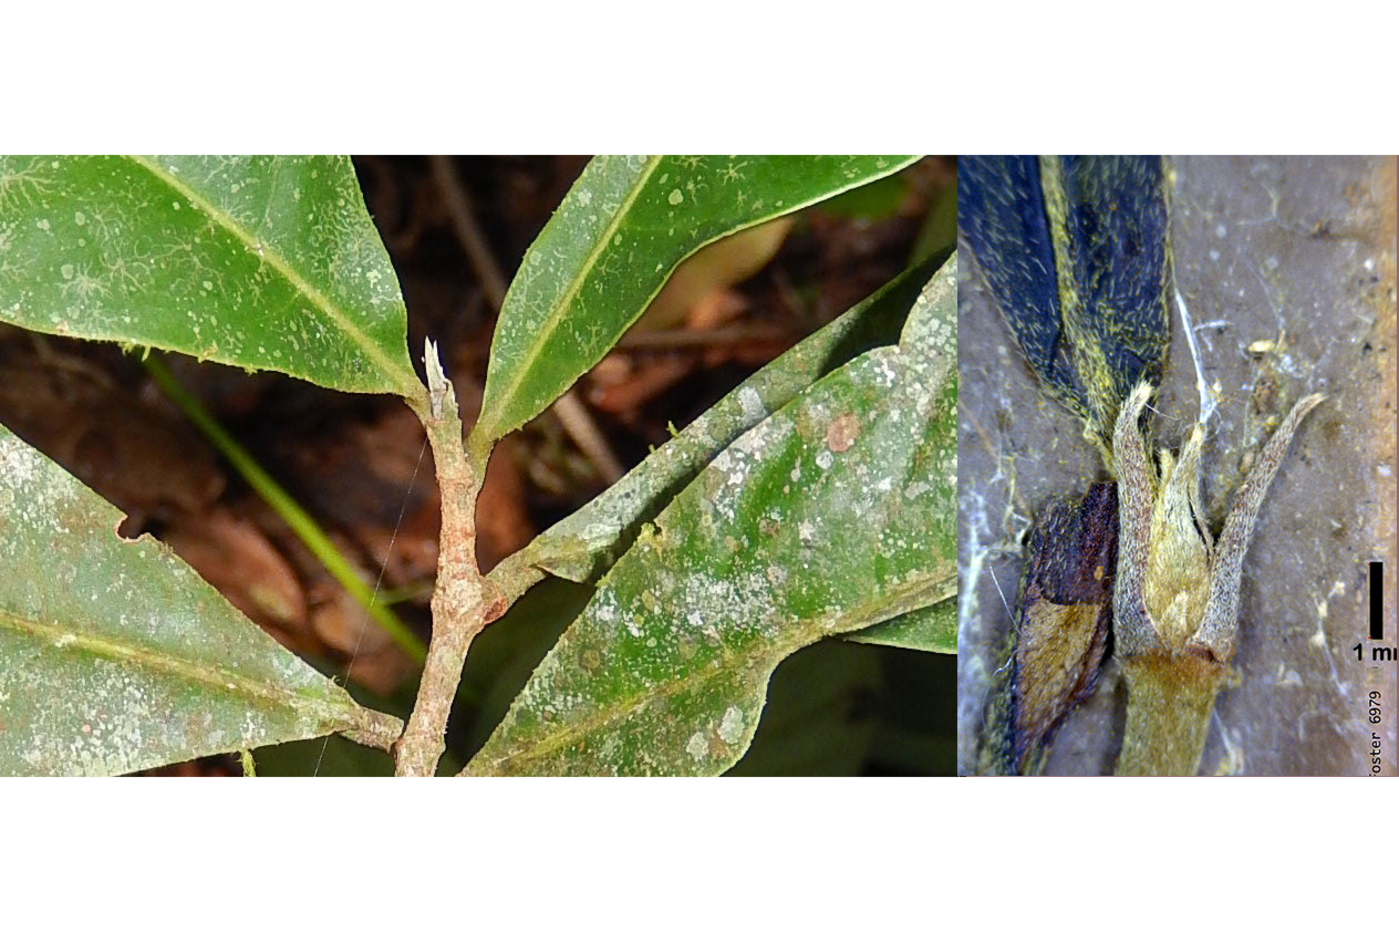 Two photos of the center stem of a plant with green leaves. The image on the right is a close-up view through a microscope. 